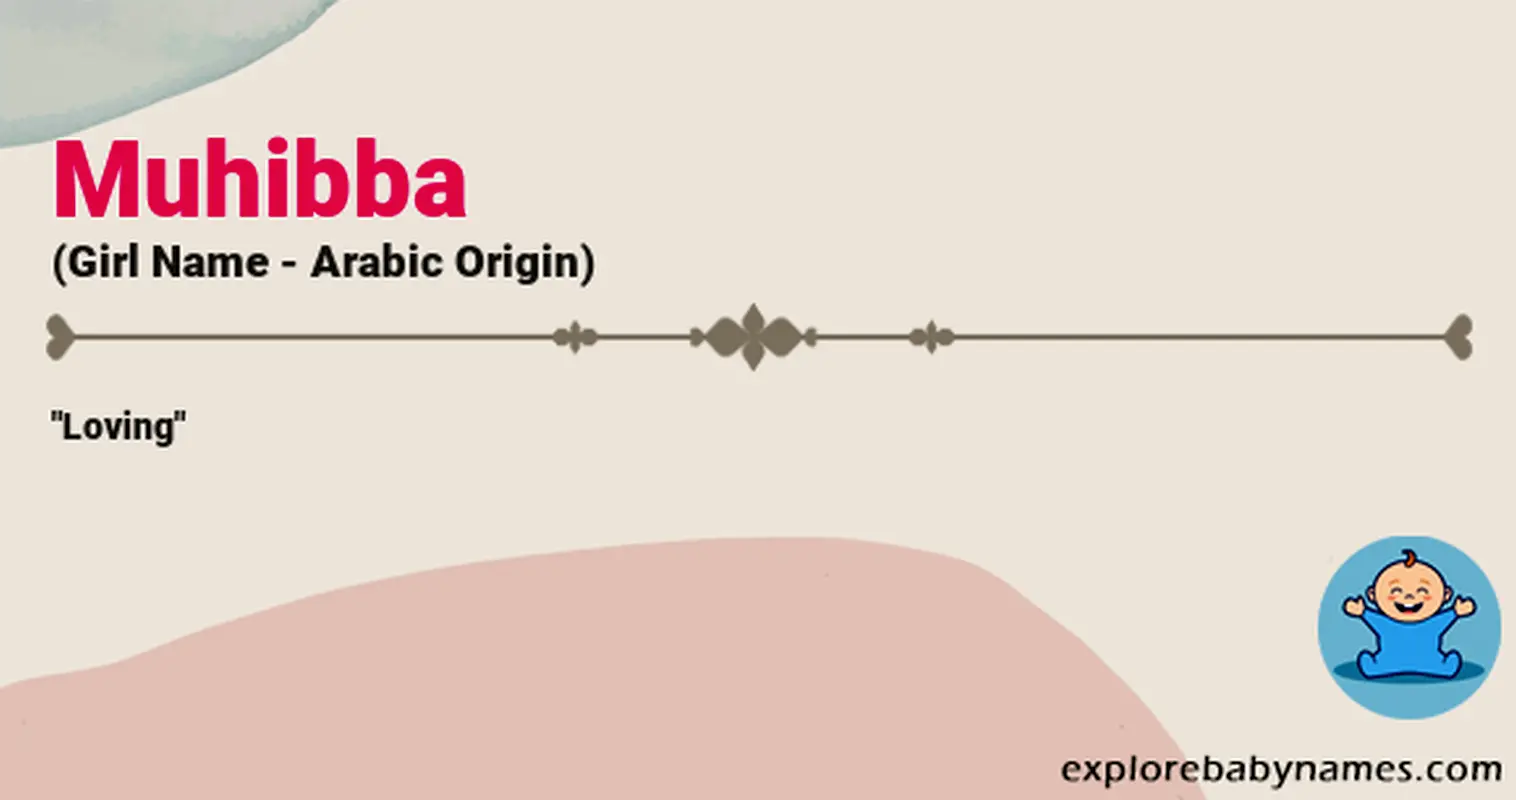 Meaning of Muhibba